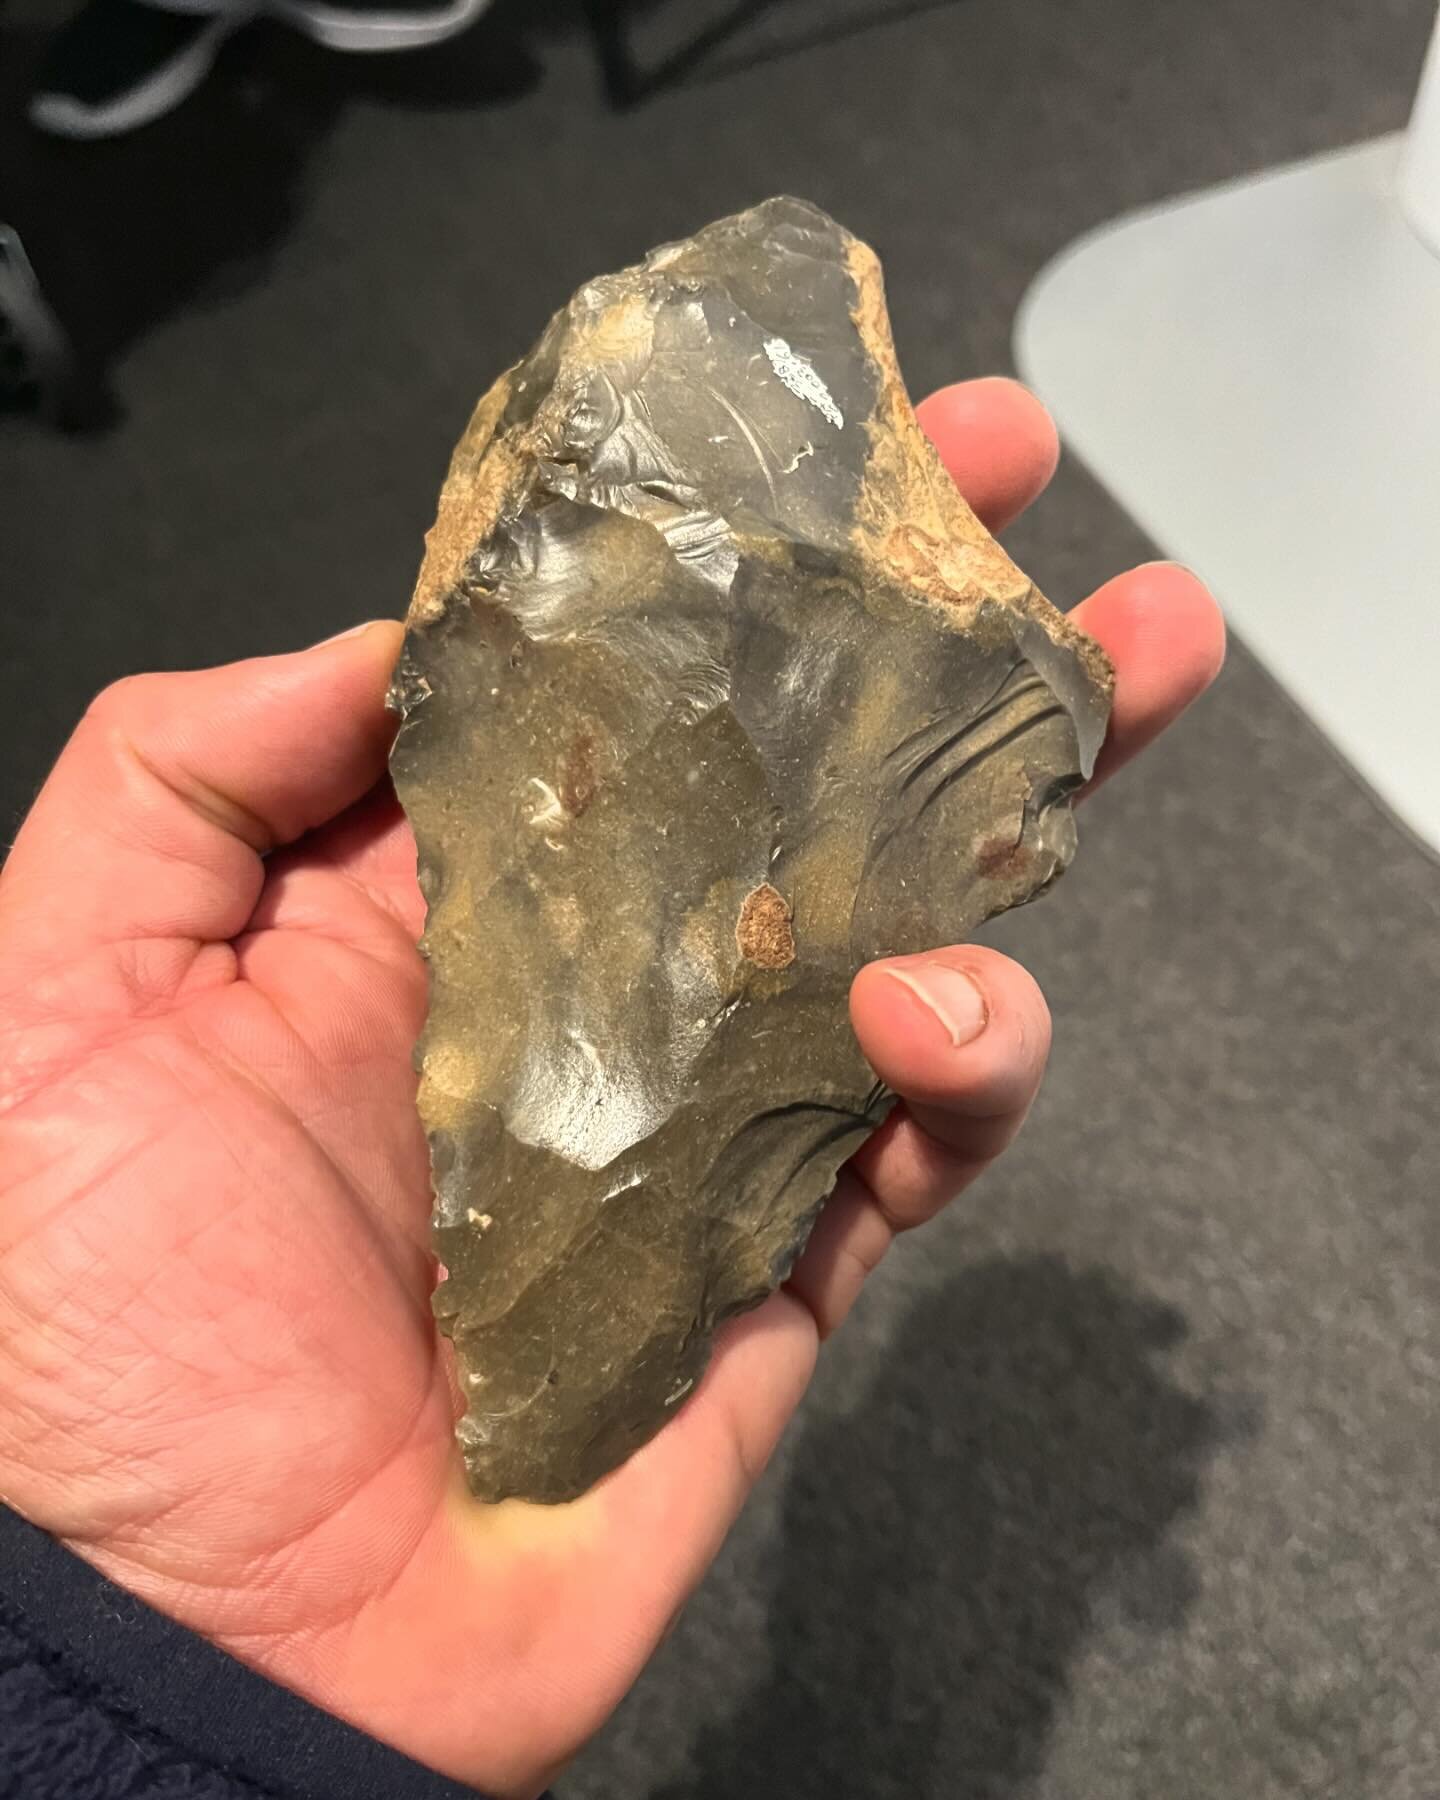 Pretty cool to hold actual artifact. Neanderthal hand ax about 500 000 years old! I wonder what stories this could tell&hellip;.

#vikiesbowsandarrows #stonetool #stoneagetools #stoneage #stoneageliving #artifacts #caveman #ancestralskills #earthskil